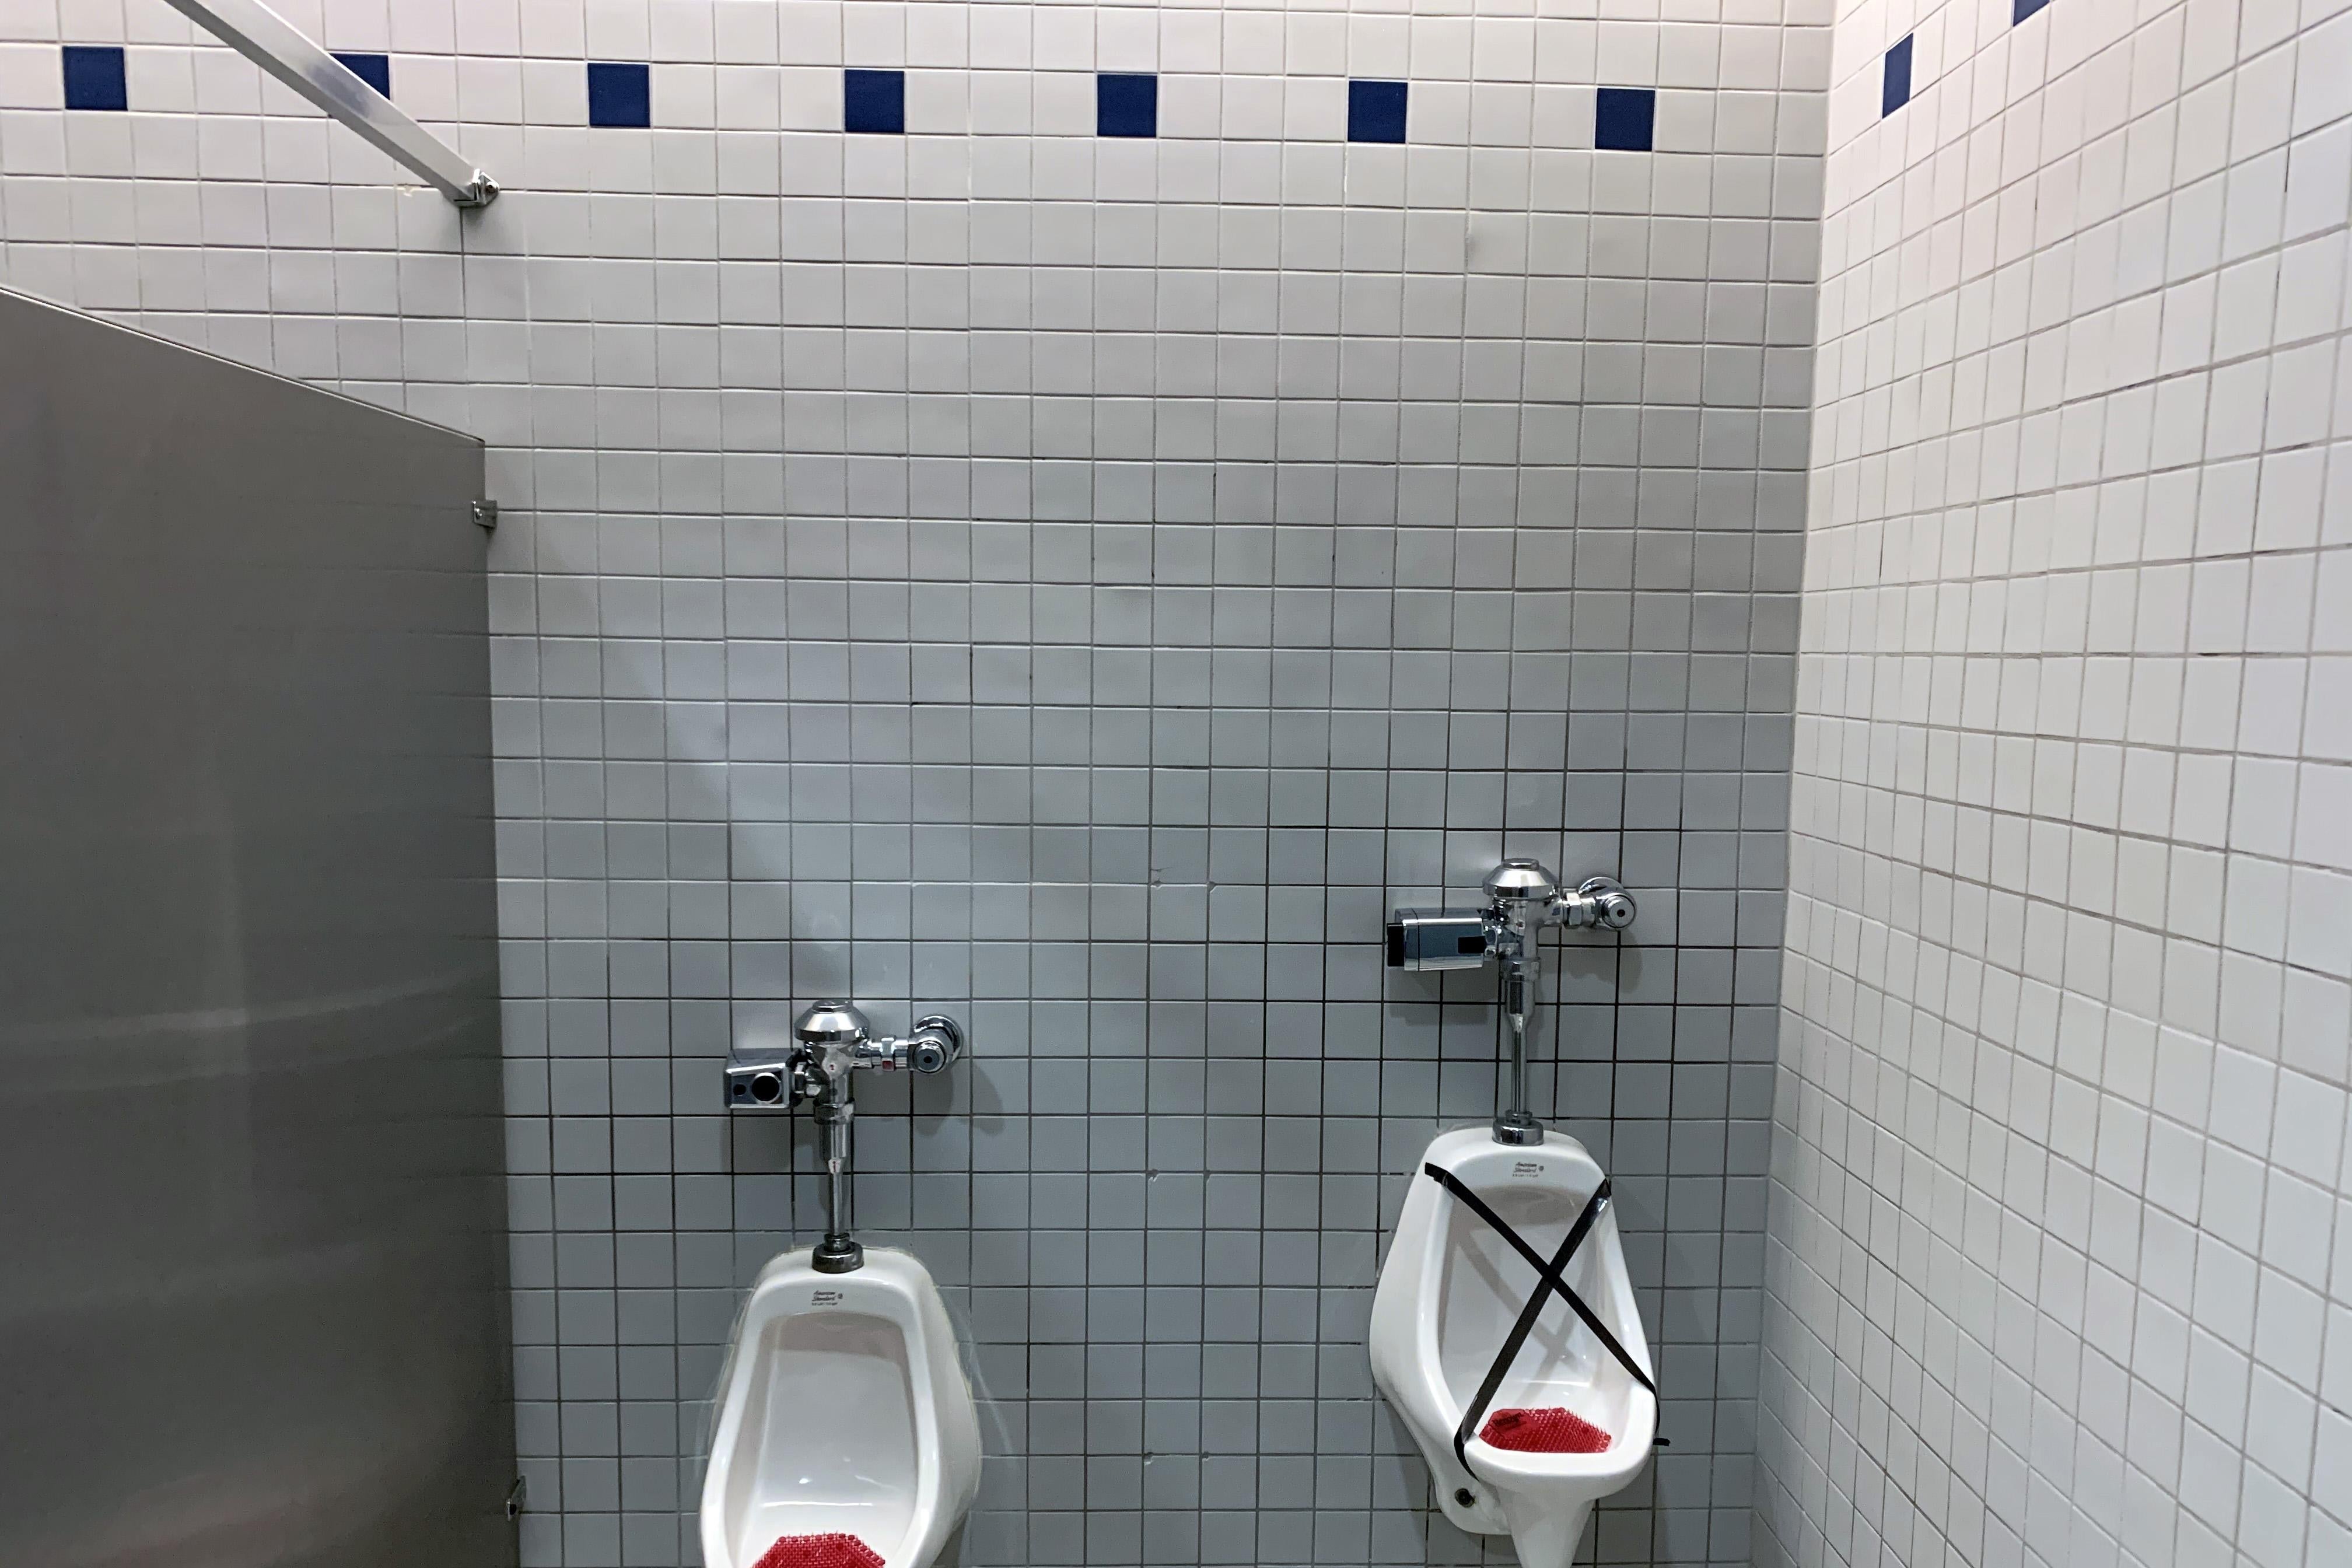 Two urinals, one taped off for social distancing.